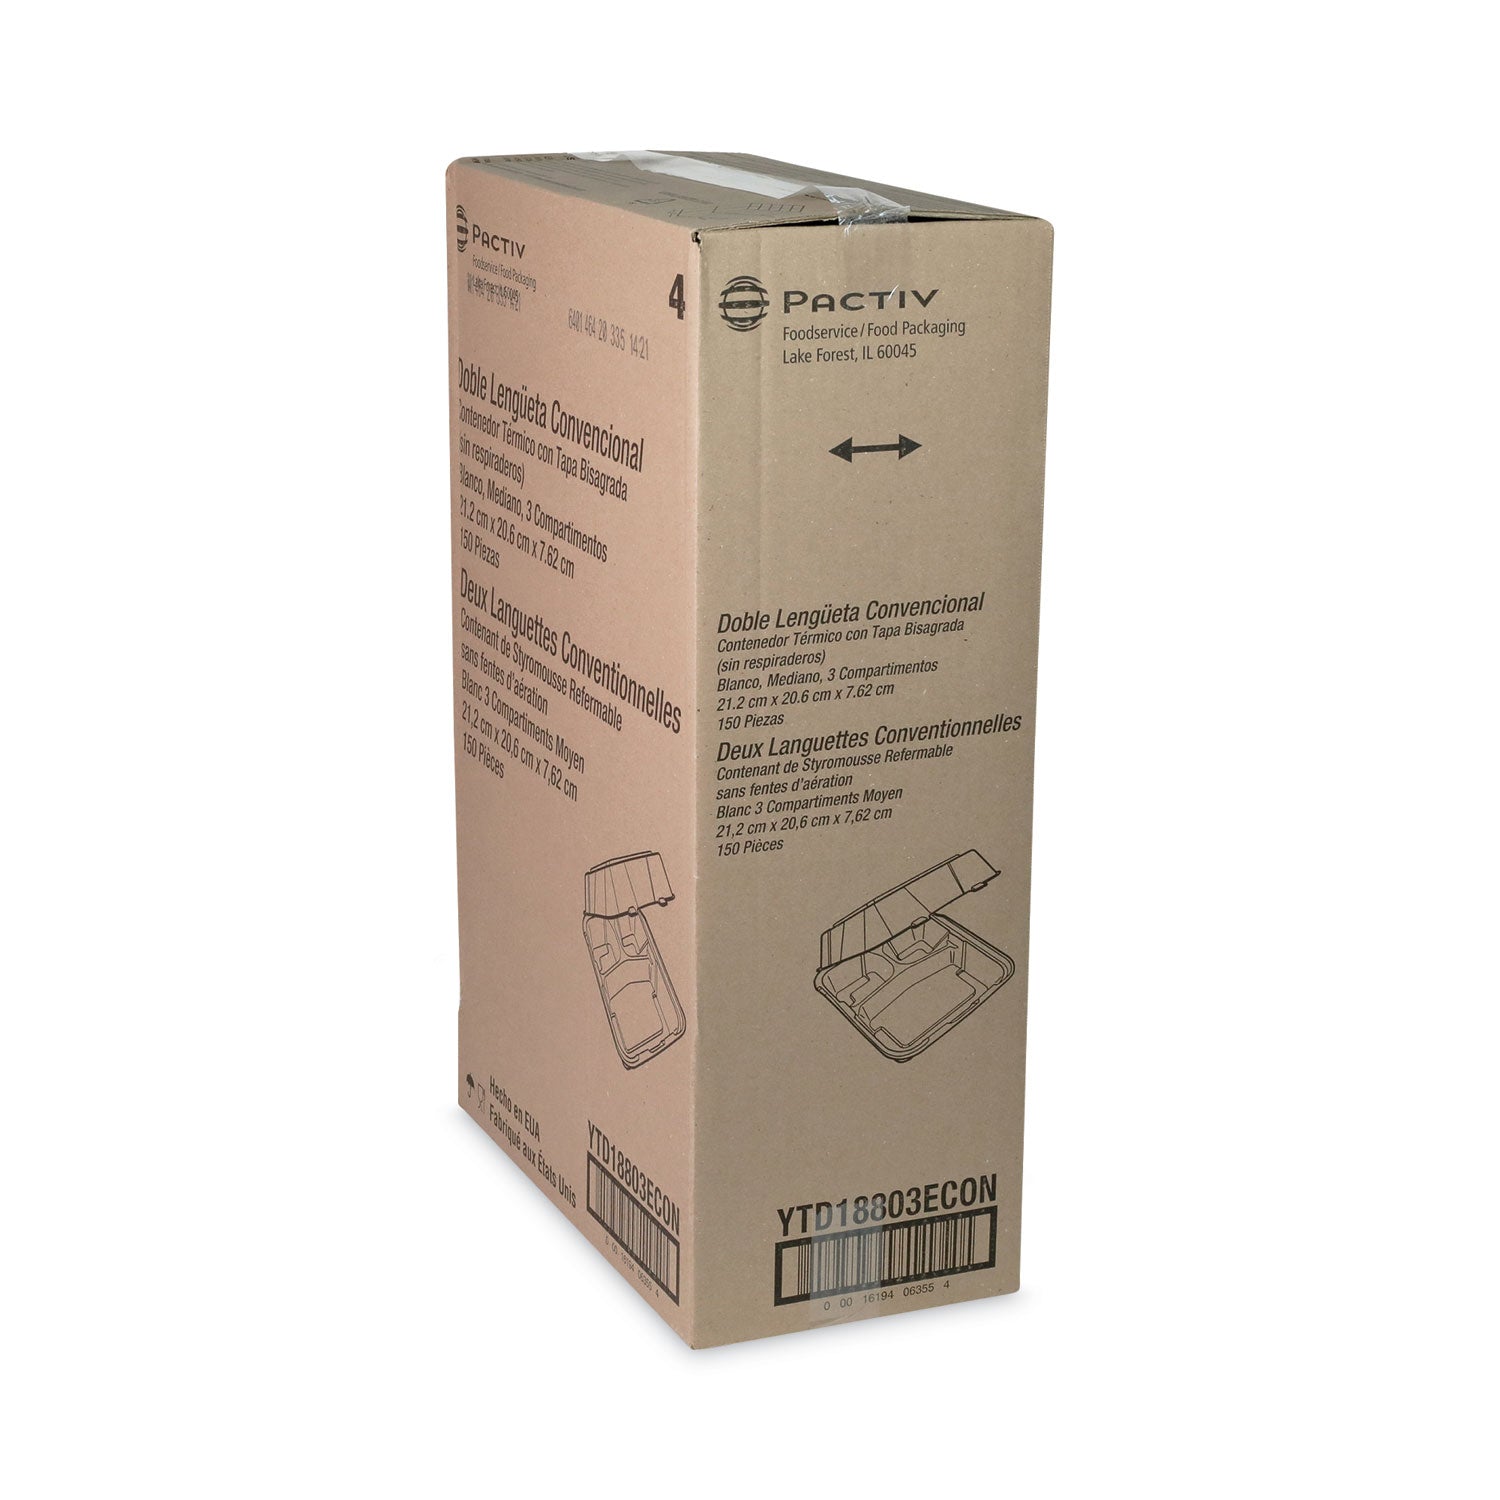 vented-foam-hinged-lid-container-dual-tab-lock-economy-3-compartment-842-x-815-x-3-white-150-carton_pctytd18803econ - 2